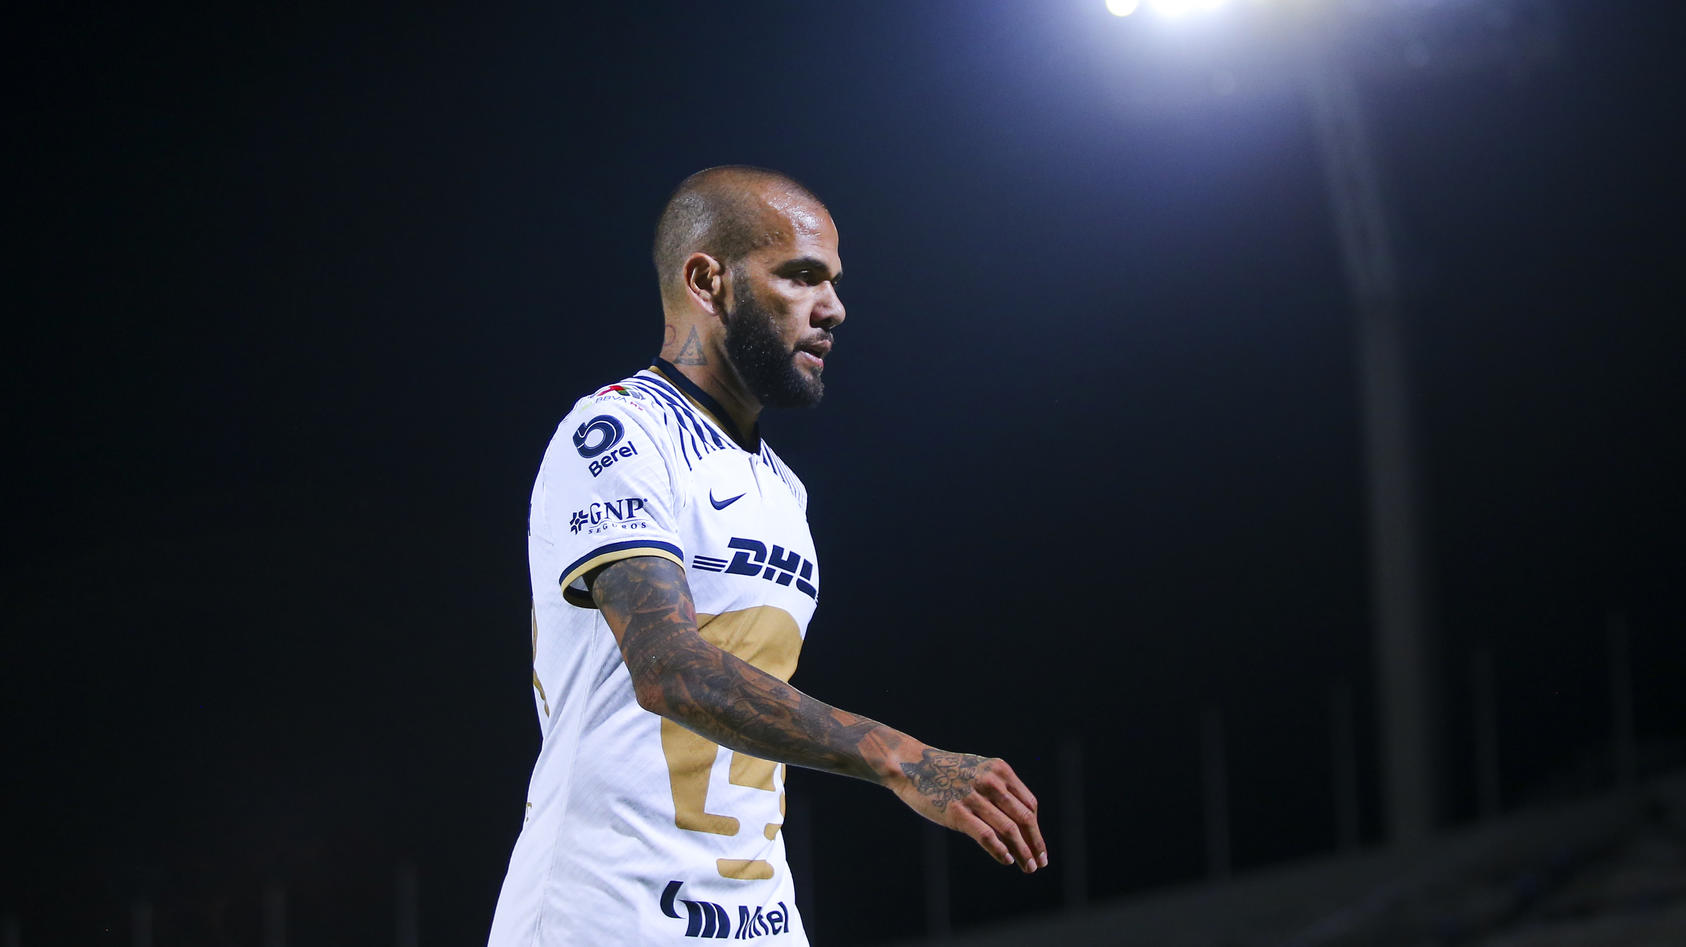 FILE - JANUARY 20, 2023: PUMAS UNAM Ternminates Dani Alves' contract after being arrested in Spain on allegations of sexual assault MEXICO CITY, MEXICO - SEPTEMBER 07: Dani Alves of Pumas looks on during the 13th round match between Pumas UNAM and Qu